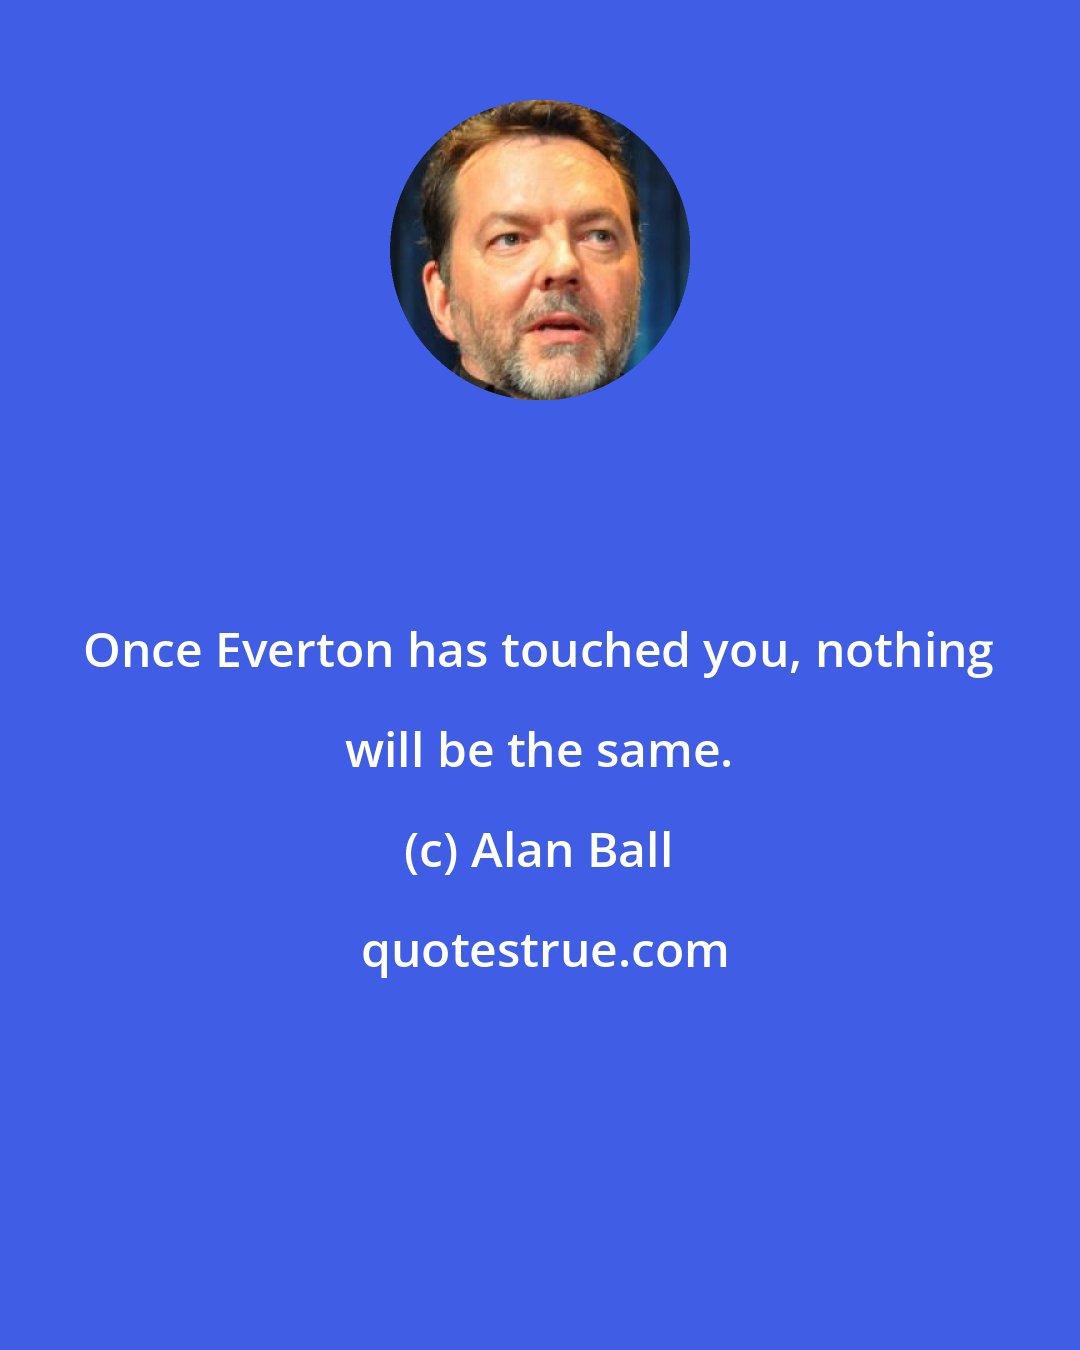 Alan Ball: Once Everton has touched you, nothing will be the same.